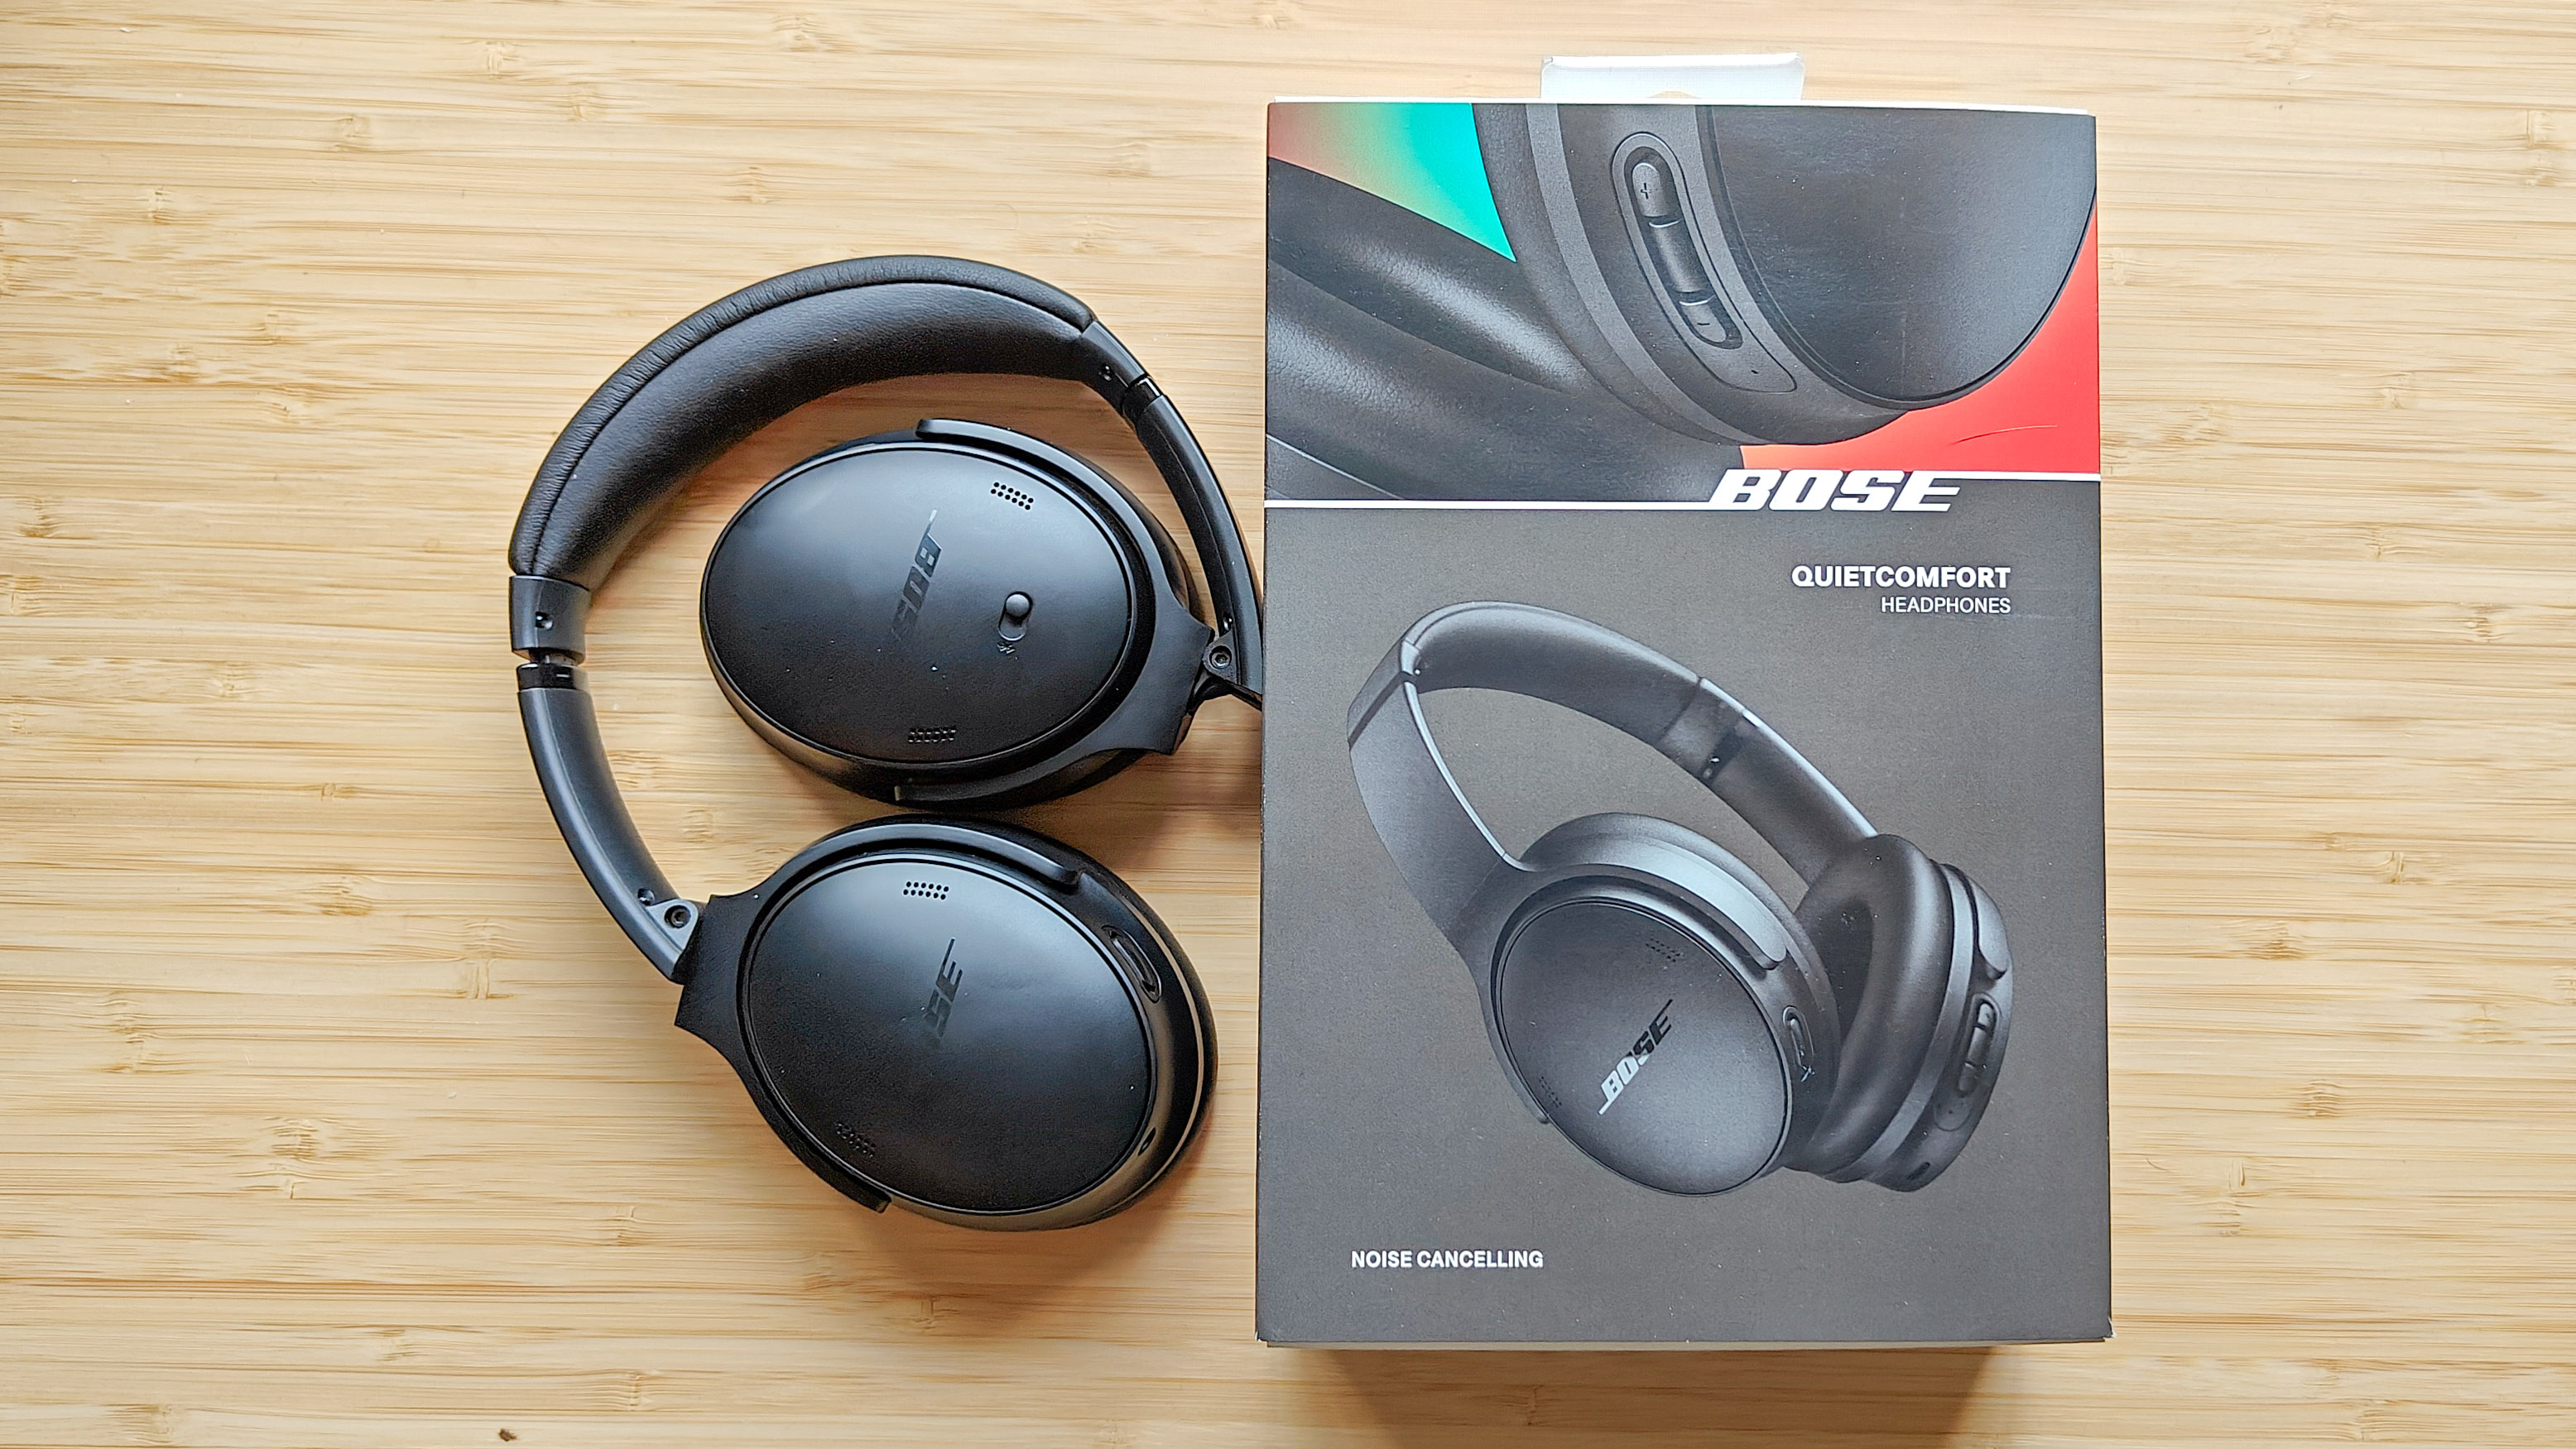 Bose QuietComfort Headphones with the packing box